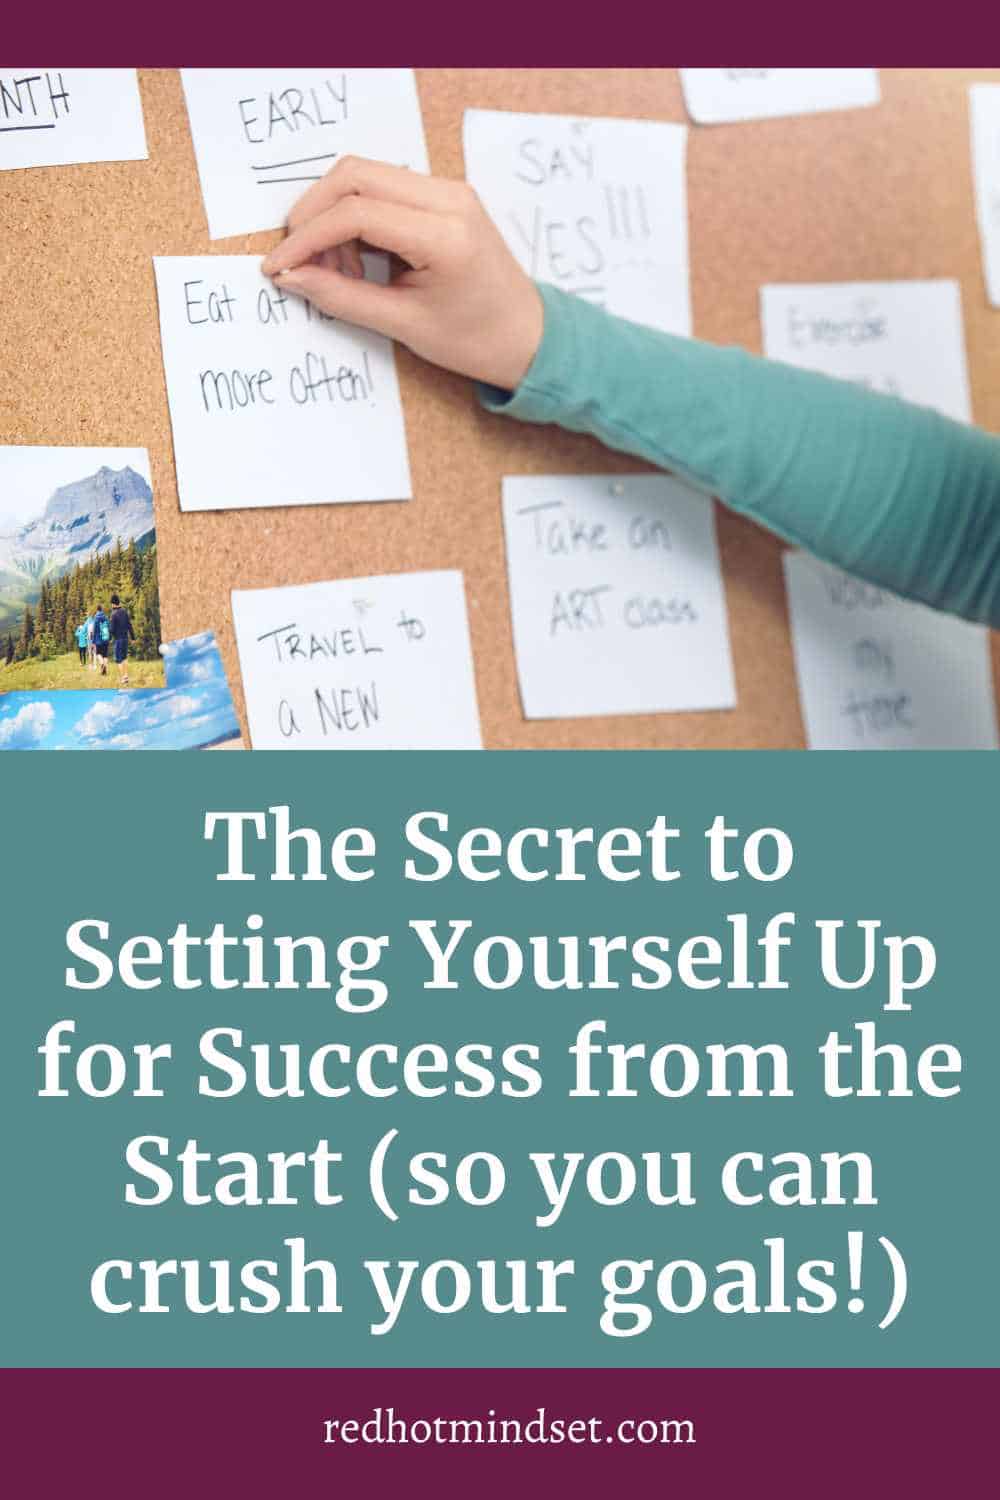 Pinterest cover photo with a cork board full of goals written on post it notes and a hand reaching up to pin one. The title says, the secret to setting yourself up for success from the start (so you can crush your goals)